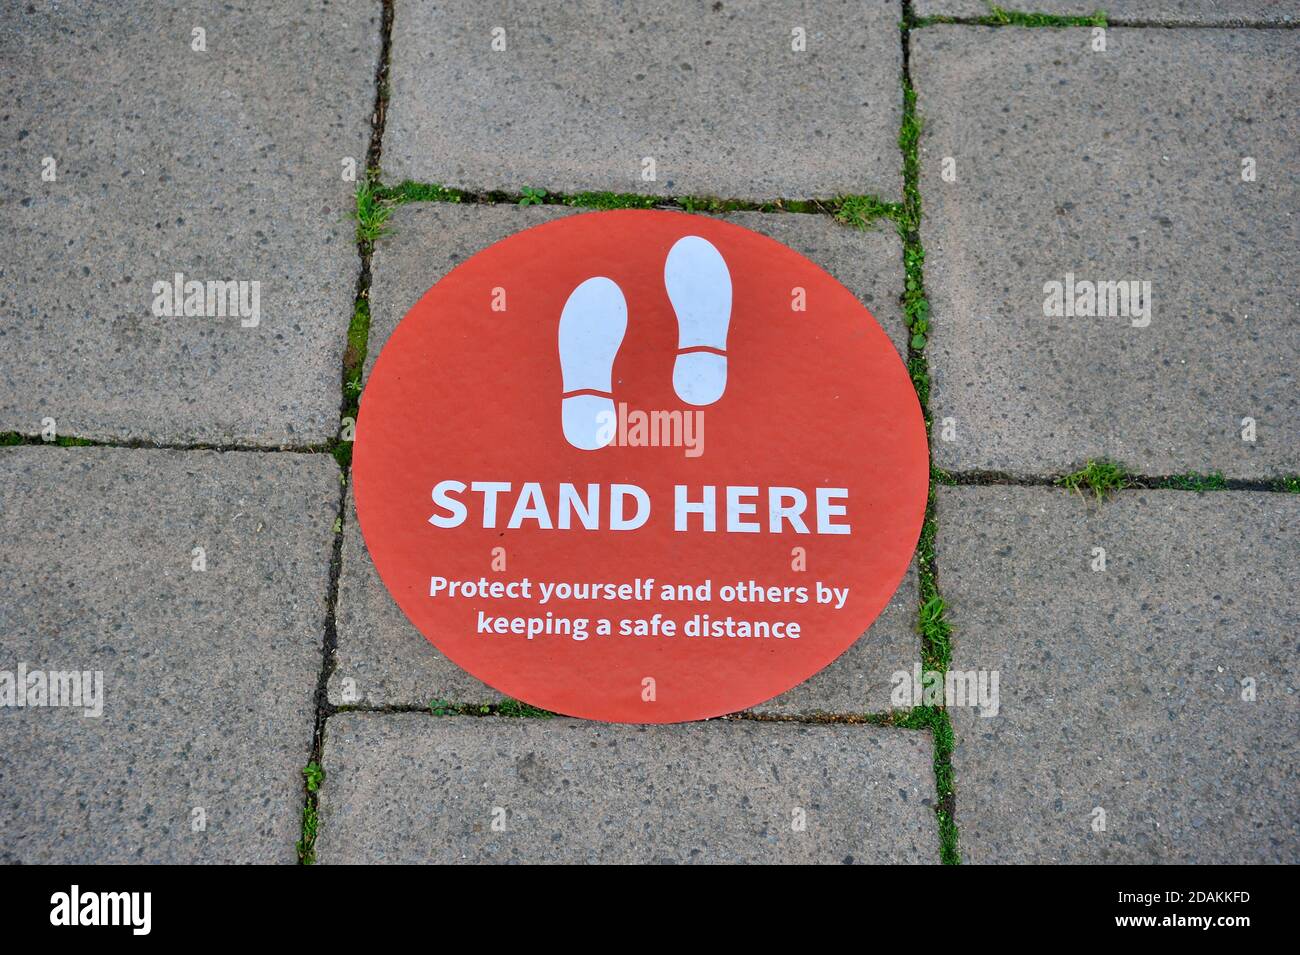 stand here floor sign covid 19 Stock Photo